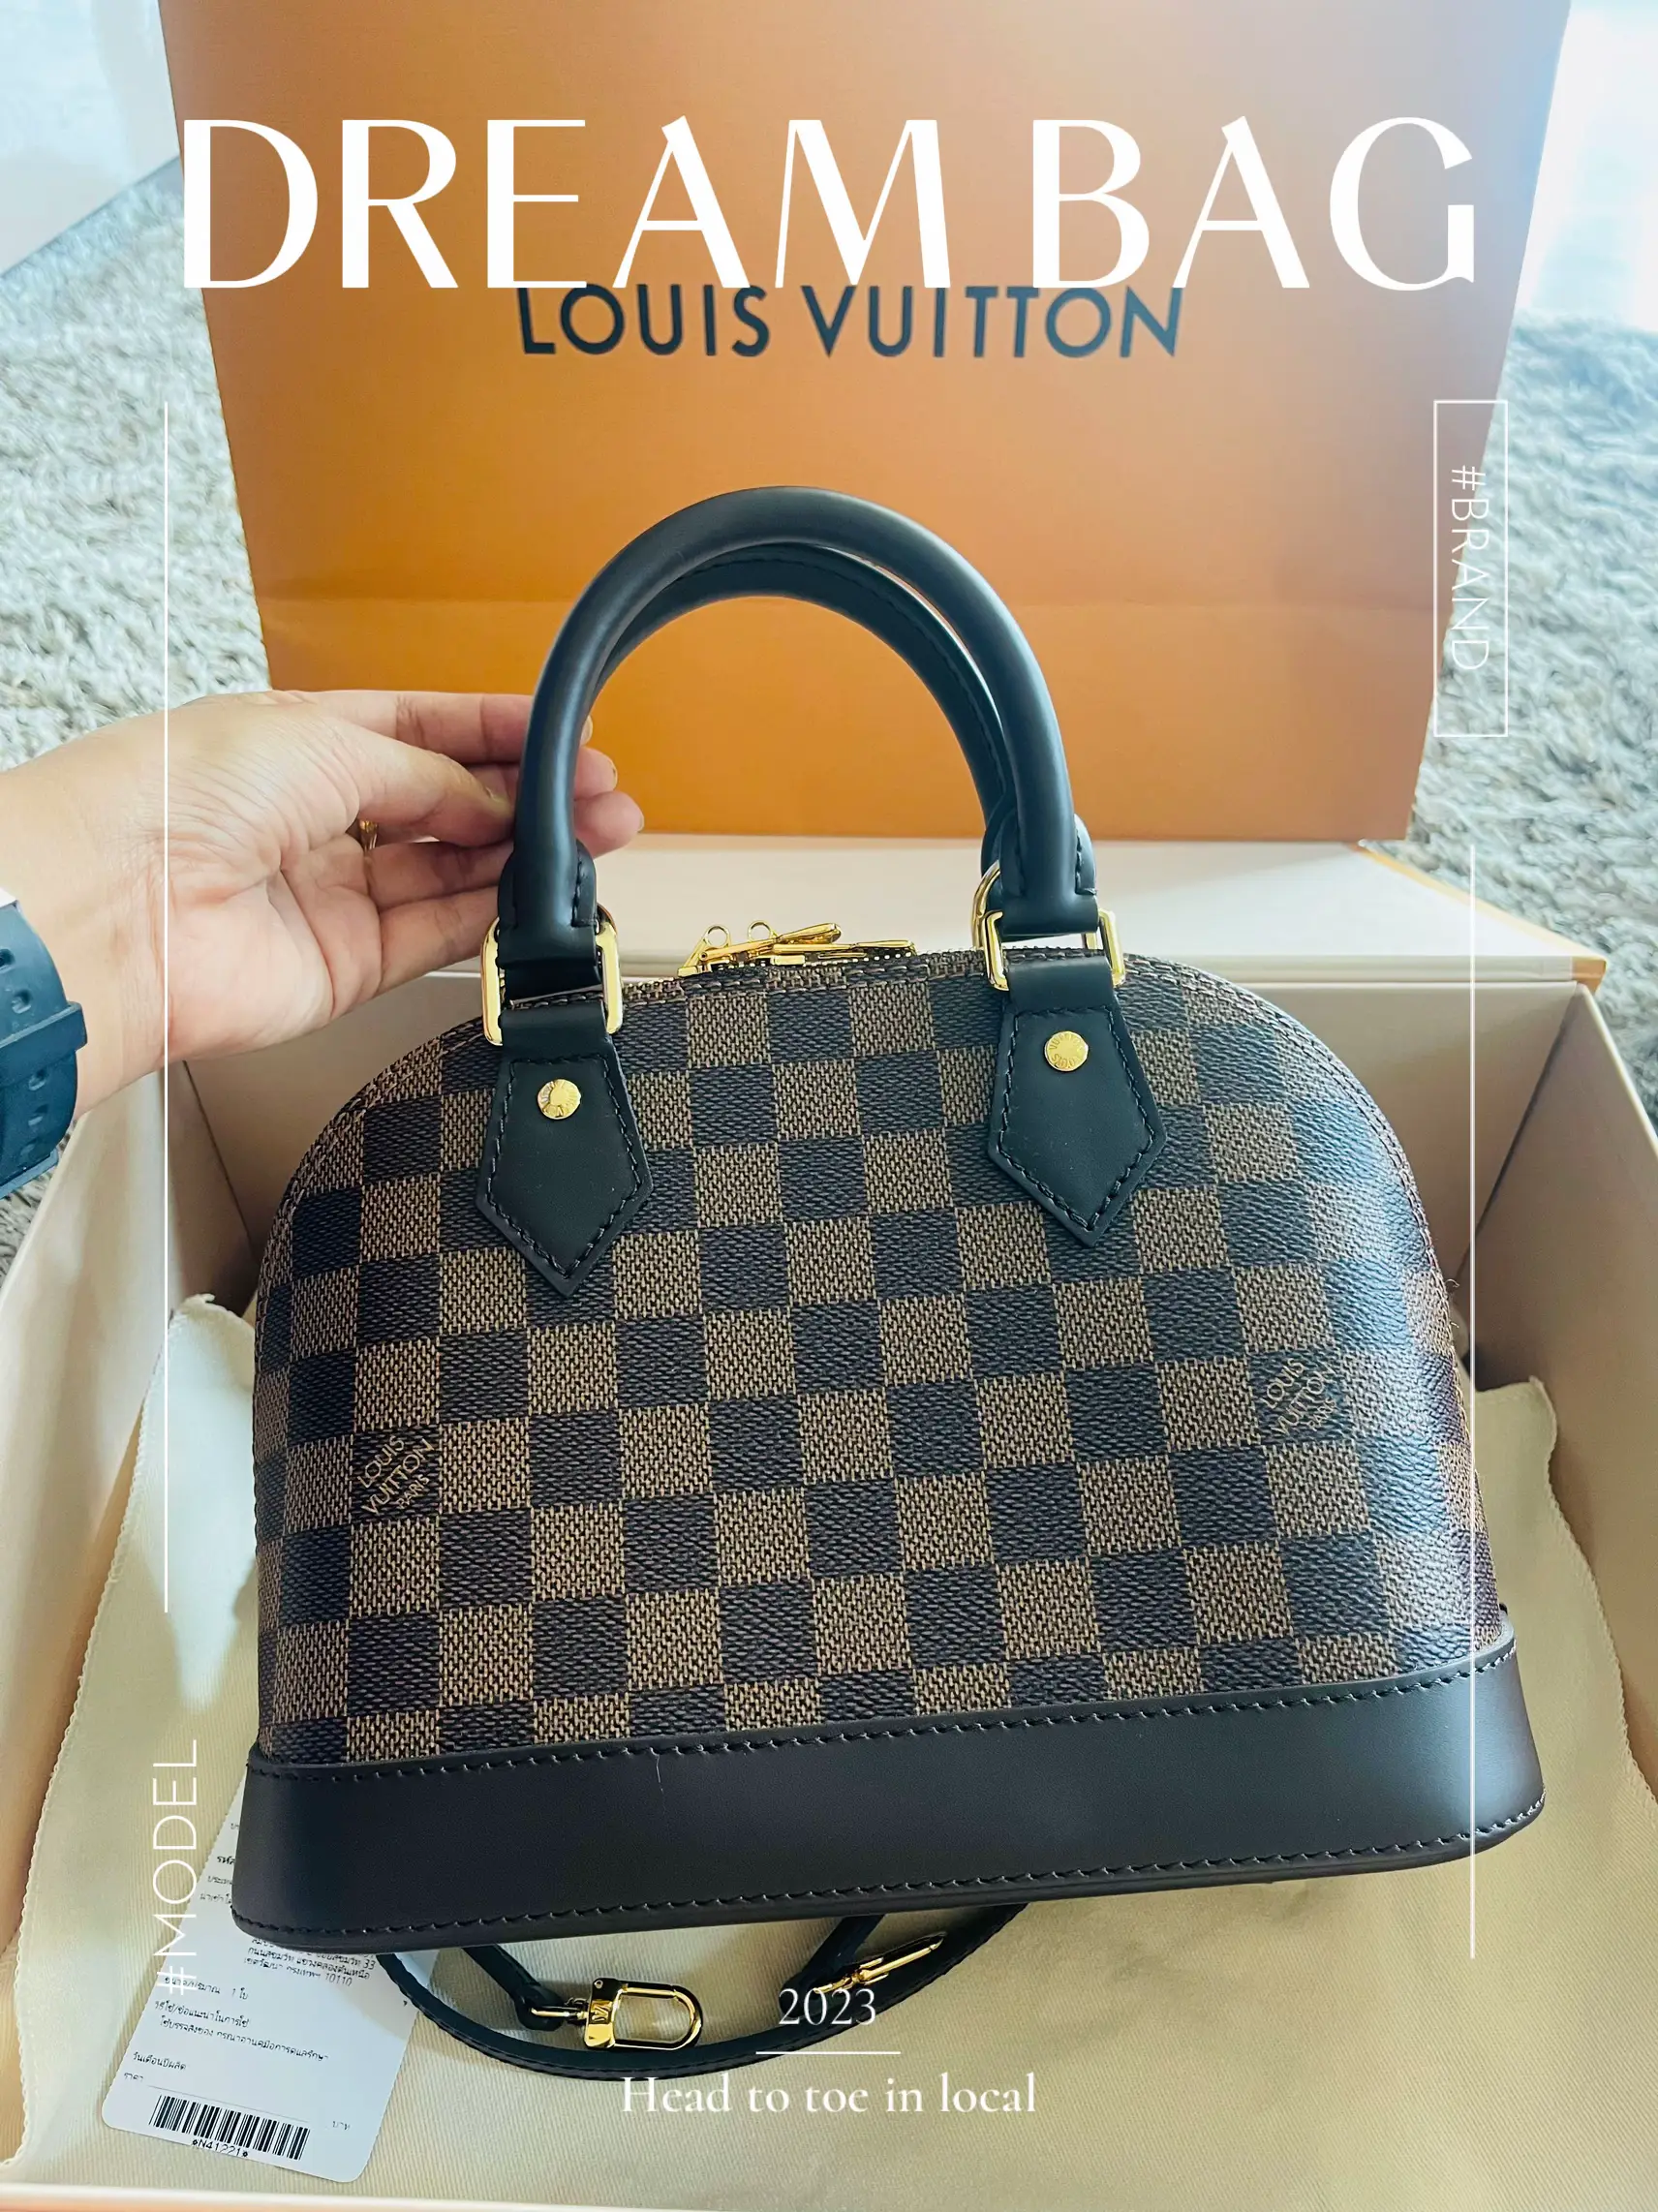 Must Have Louis Vuitton SLG Small Leather Goods  Small leather goods,  Louie vuitton, Louis vuitton